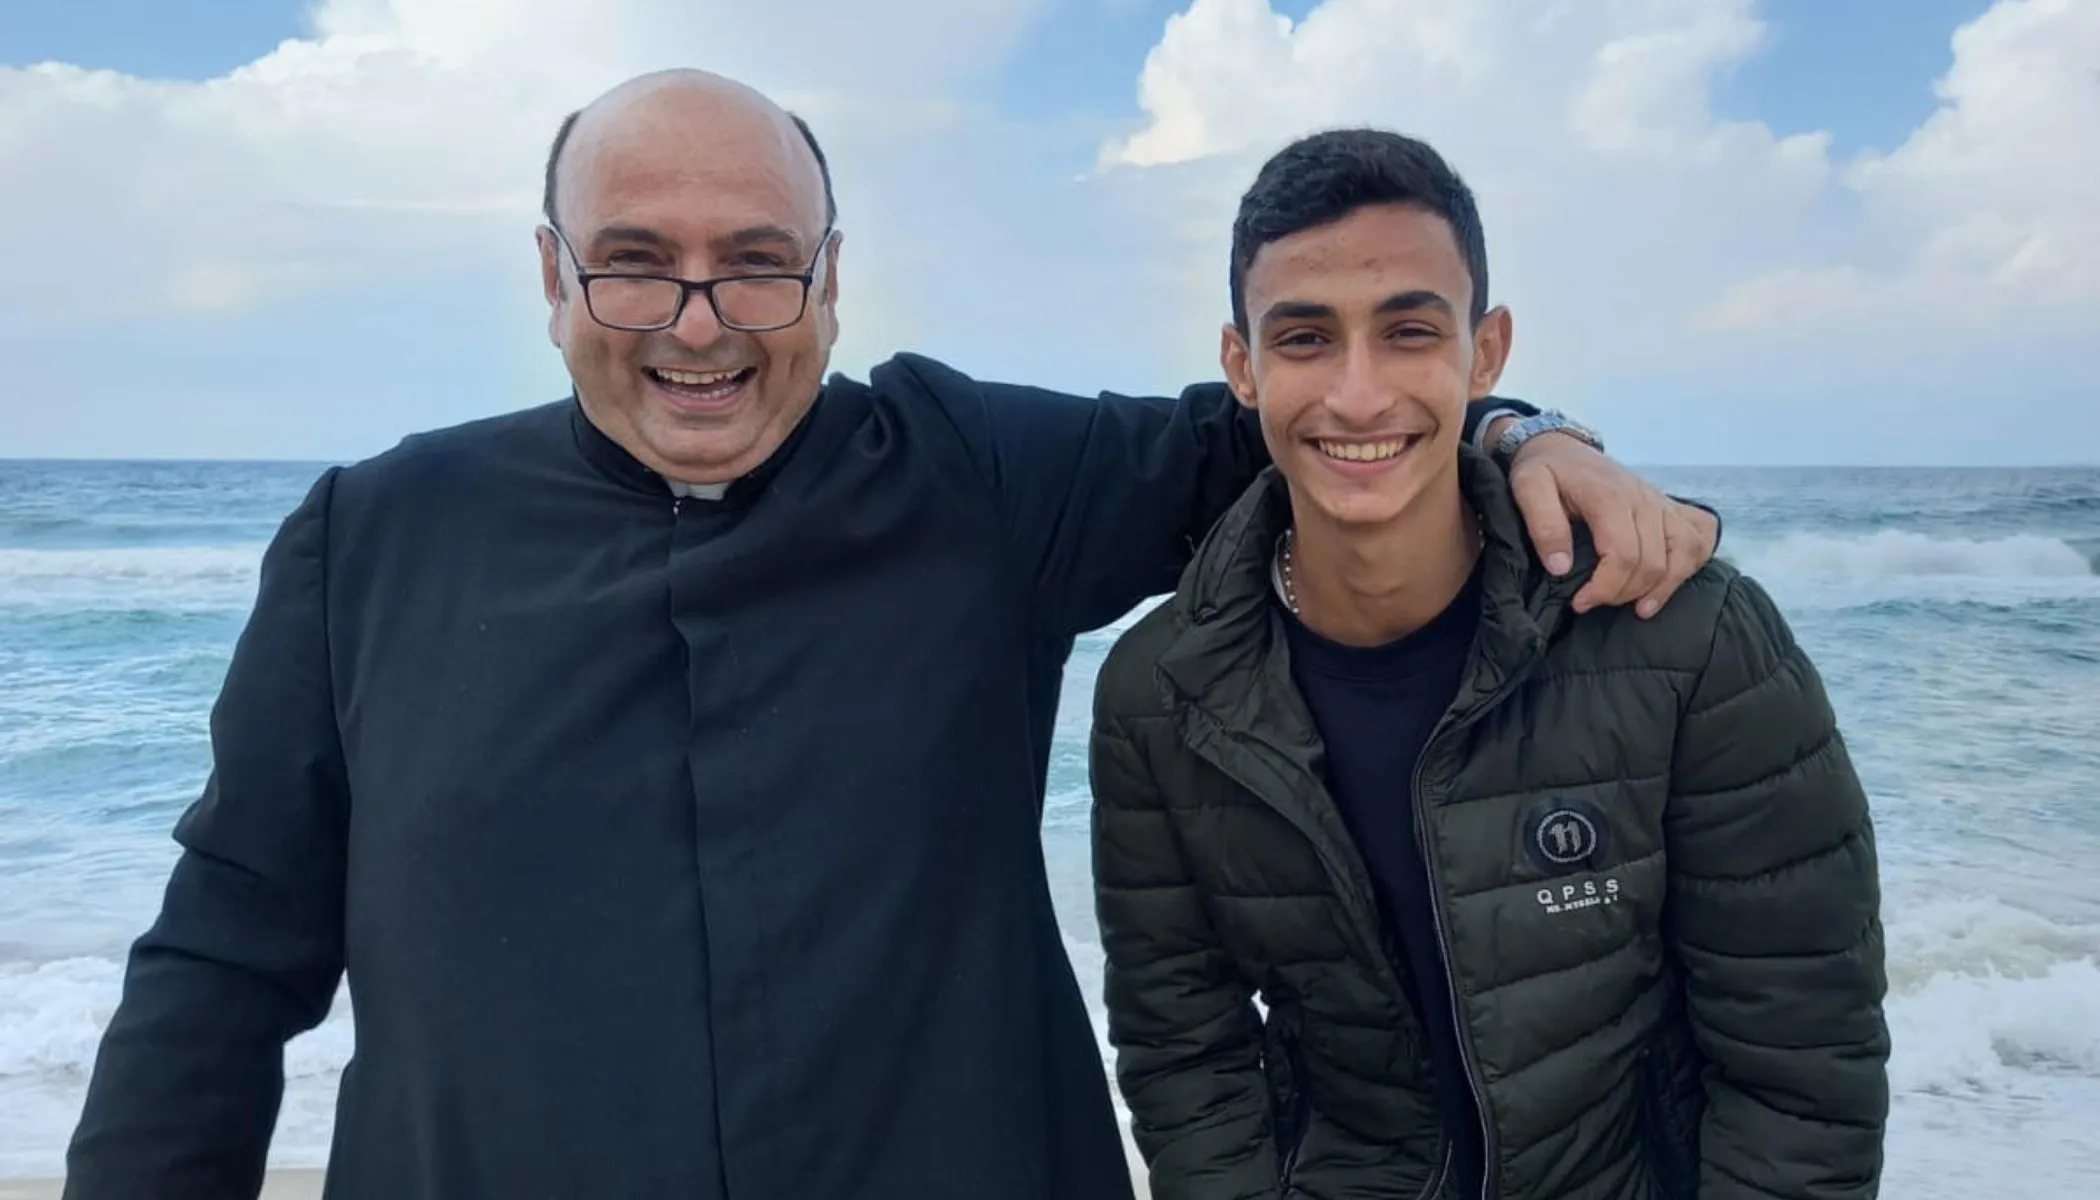 Suhail Shadi Abu Dawod with Father Gabriel Romanelli, the parish priest of Gaza, on the seashore in Gaza last summer 2023. Romanelli, belongs to the Institute of the Incarnate Word (IVE), a Catholic clerical religious institute founded in Argentina on March 25, 1984, which Abu Dawod has petitioned to join.?w=200&h=150